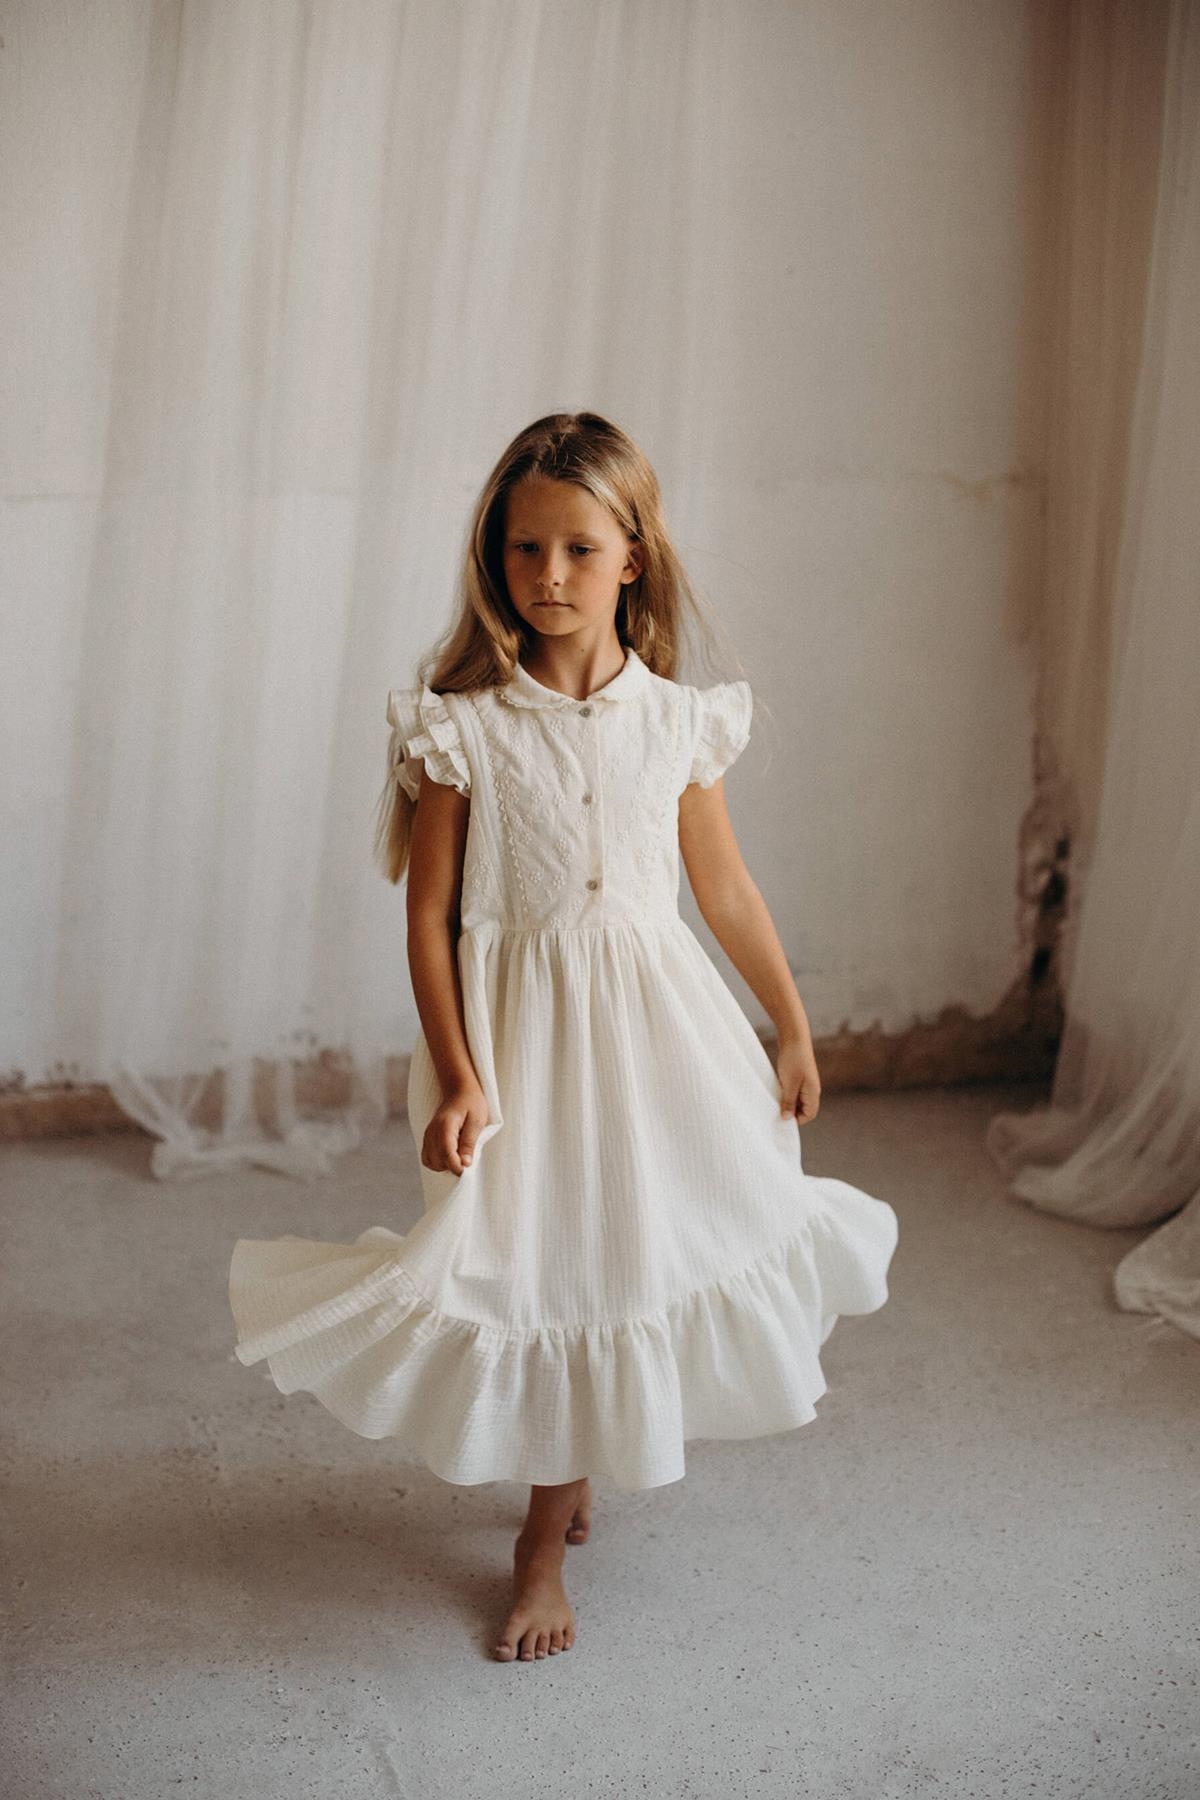 Mod.30.3 Organic off-white dress with baby-style collar | SS23 Mod.30.3 Organic off-white dress with baby-style collar